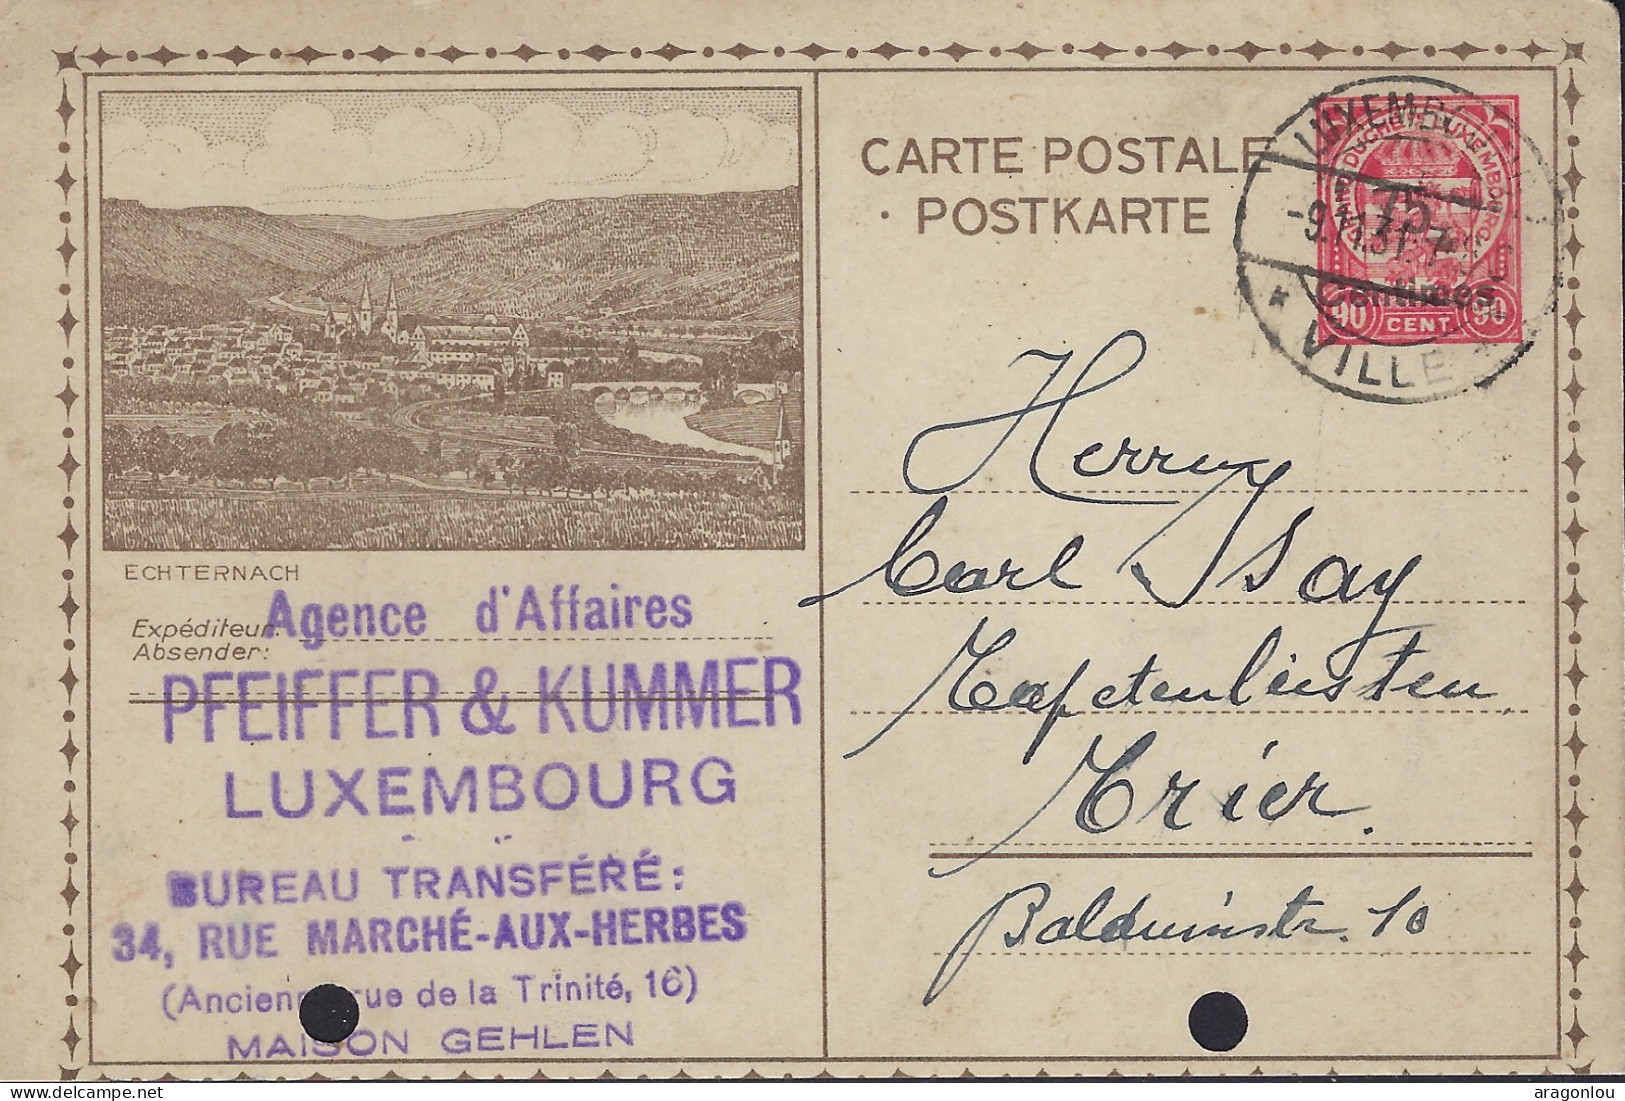 Luxembourg - Luxemburg - Carte-Postale  1931  -  Echternach -   Cachet  Luxembourg - Stamped Stationery